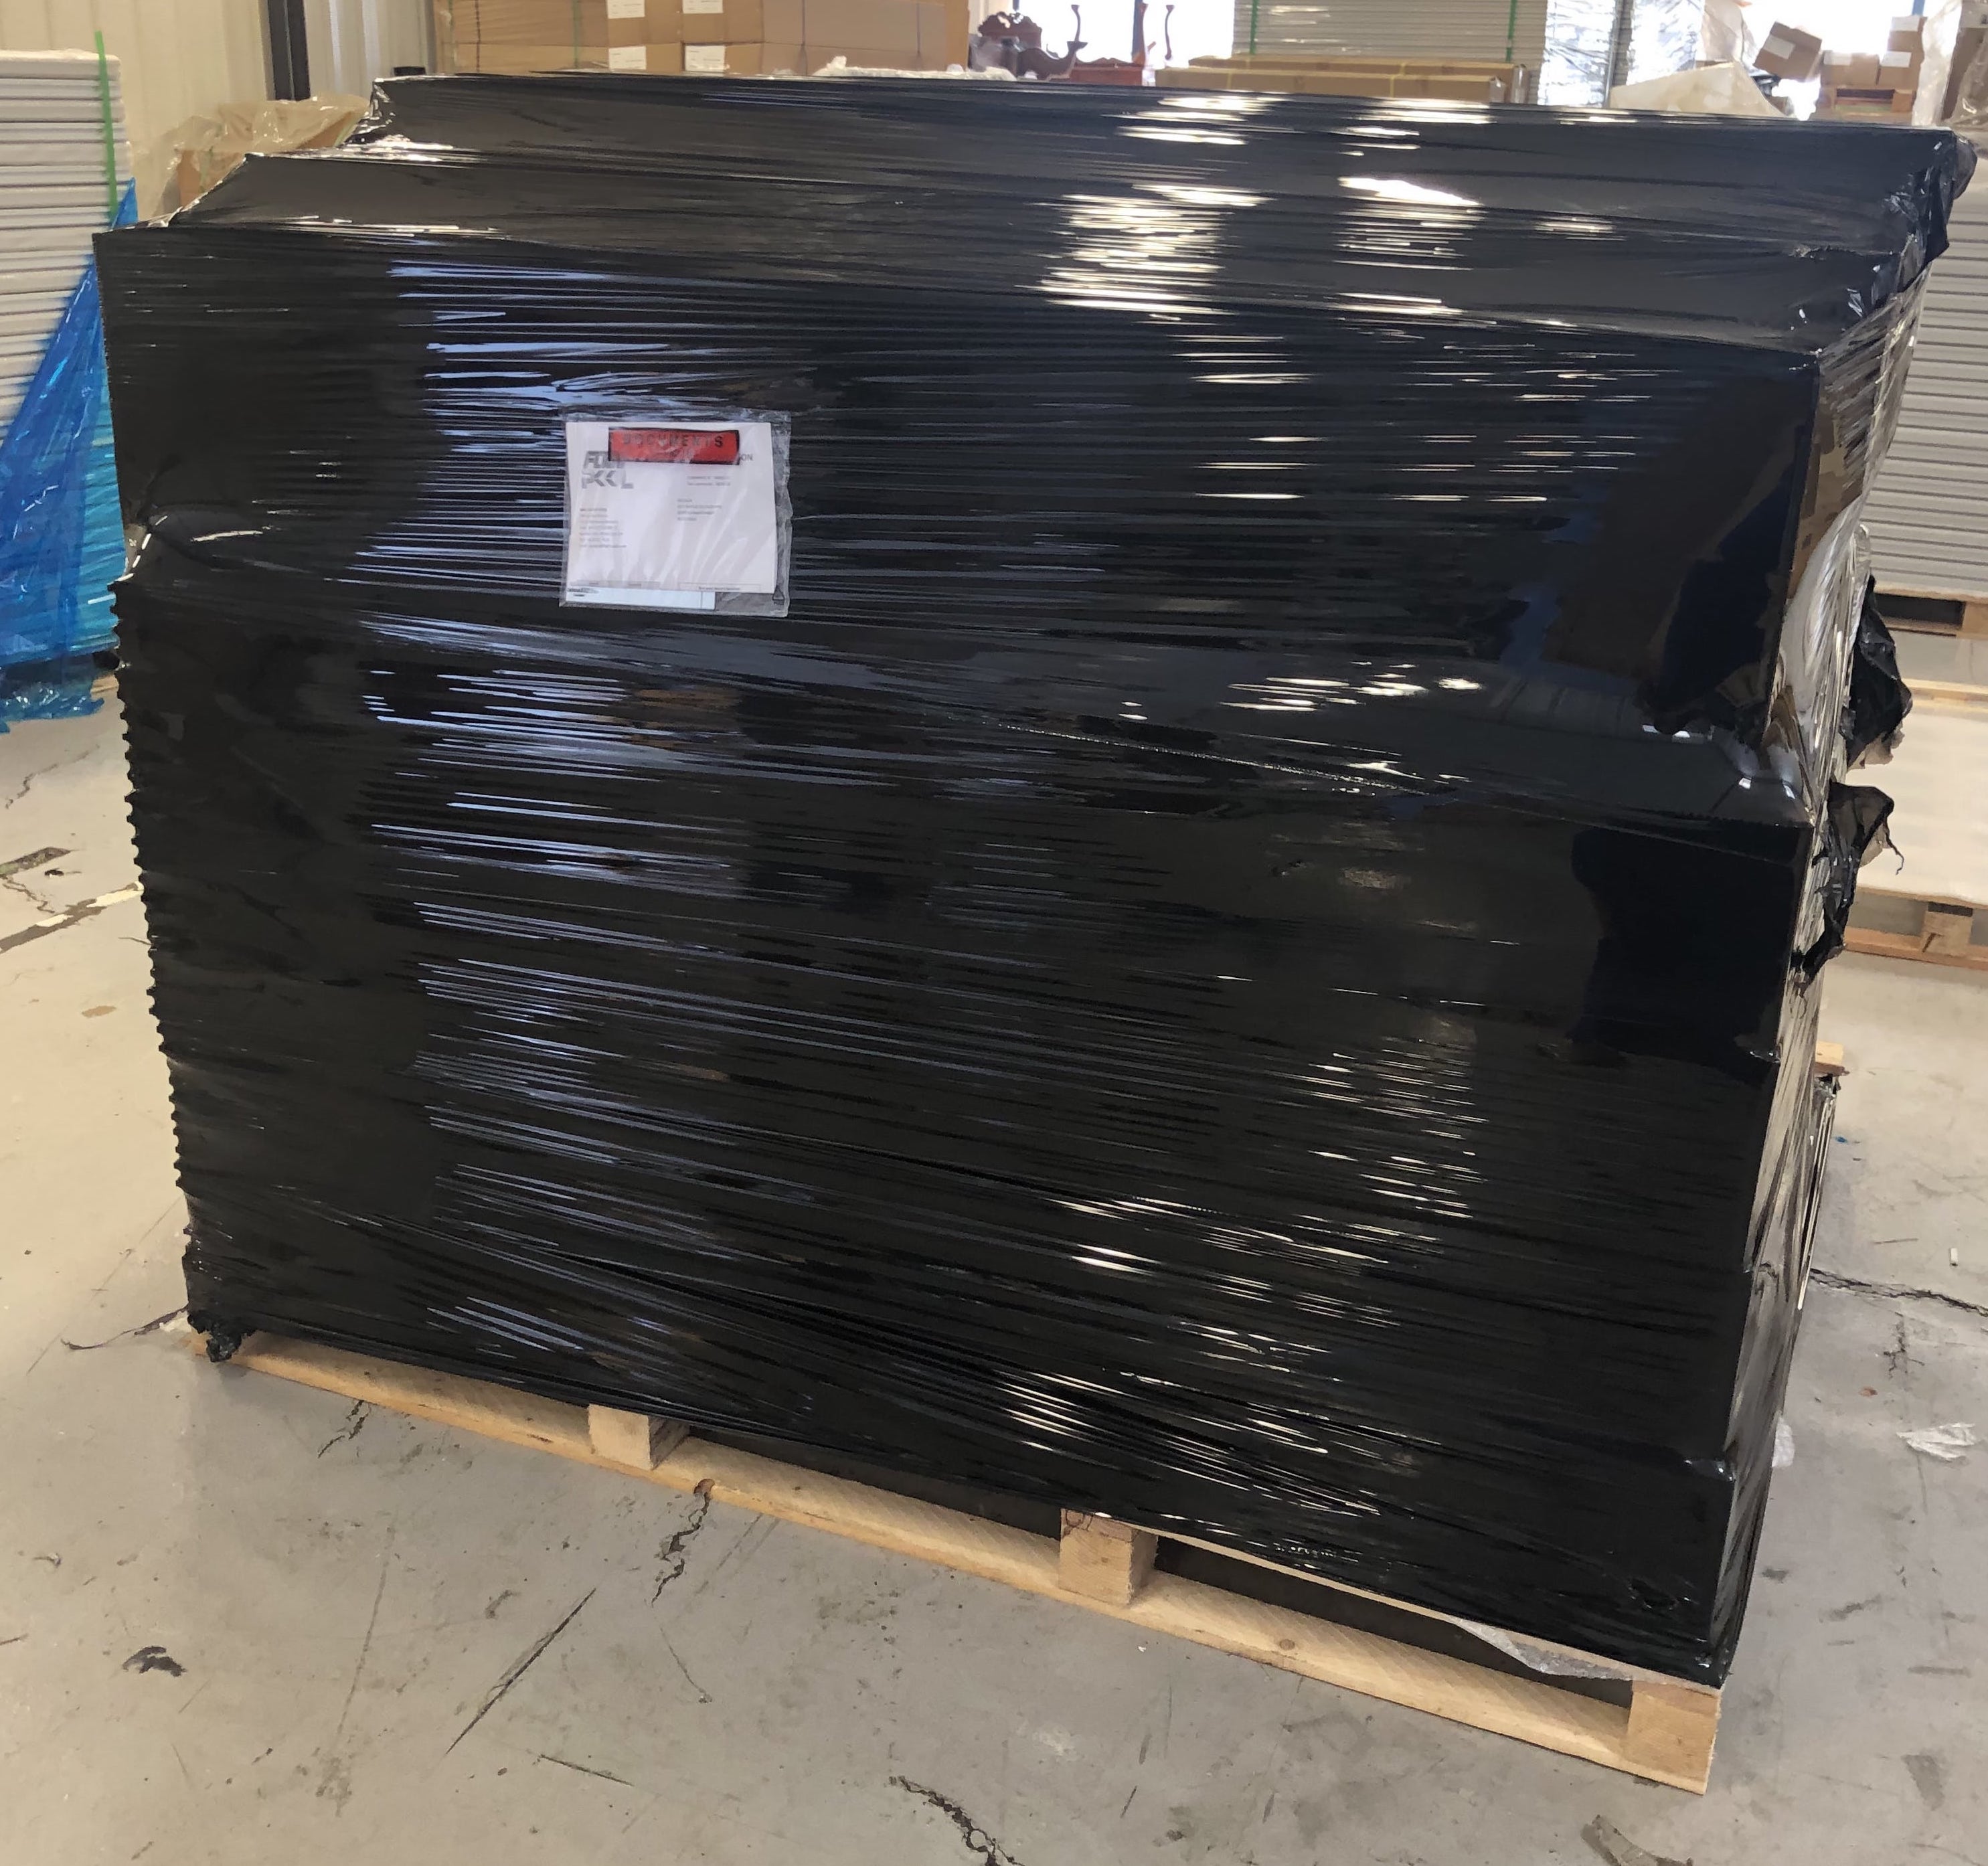 Wrapped box pallet for delivery of swimming pool kits